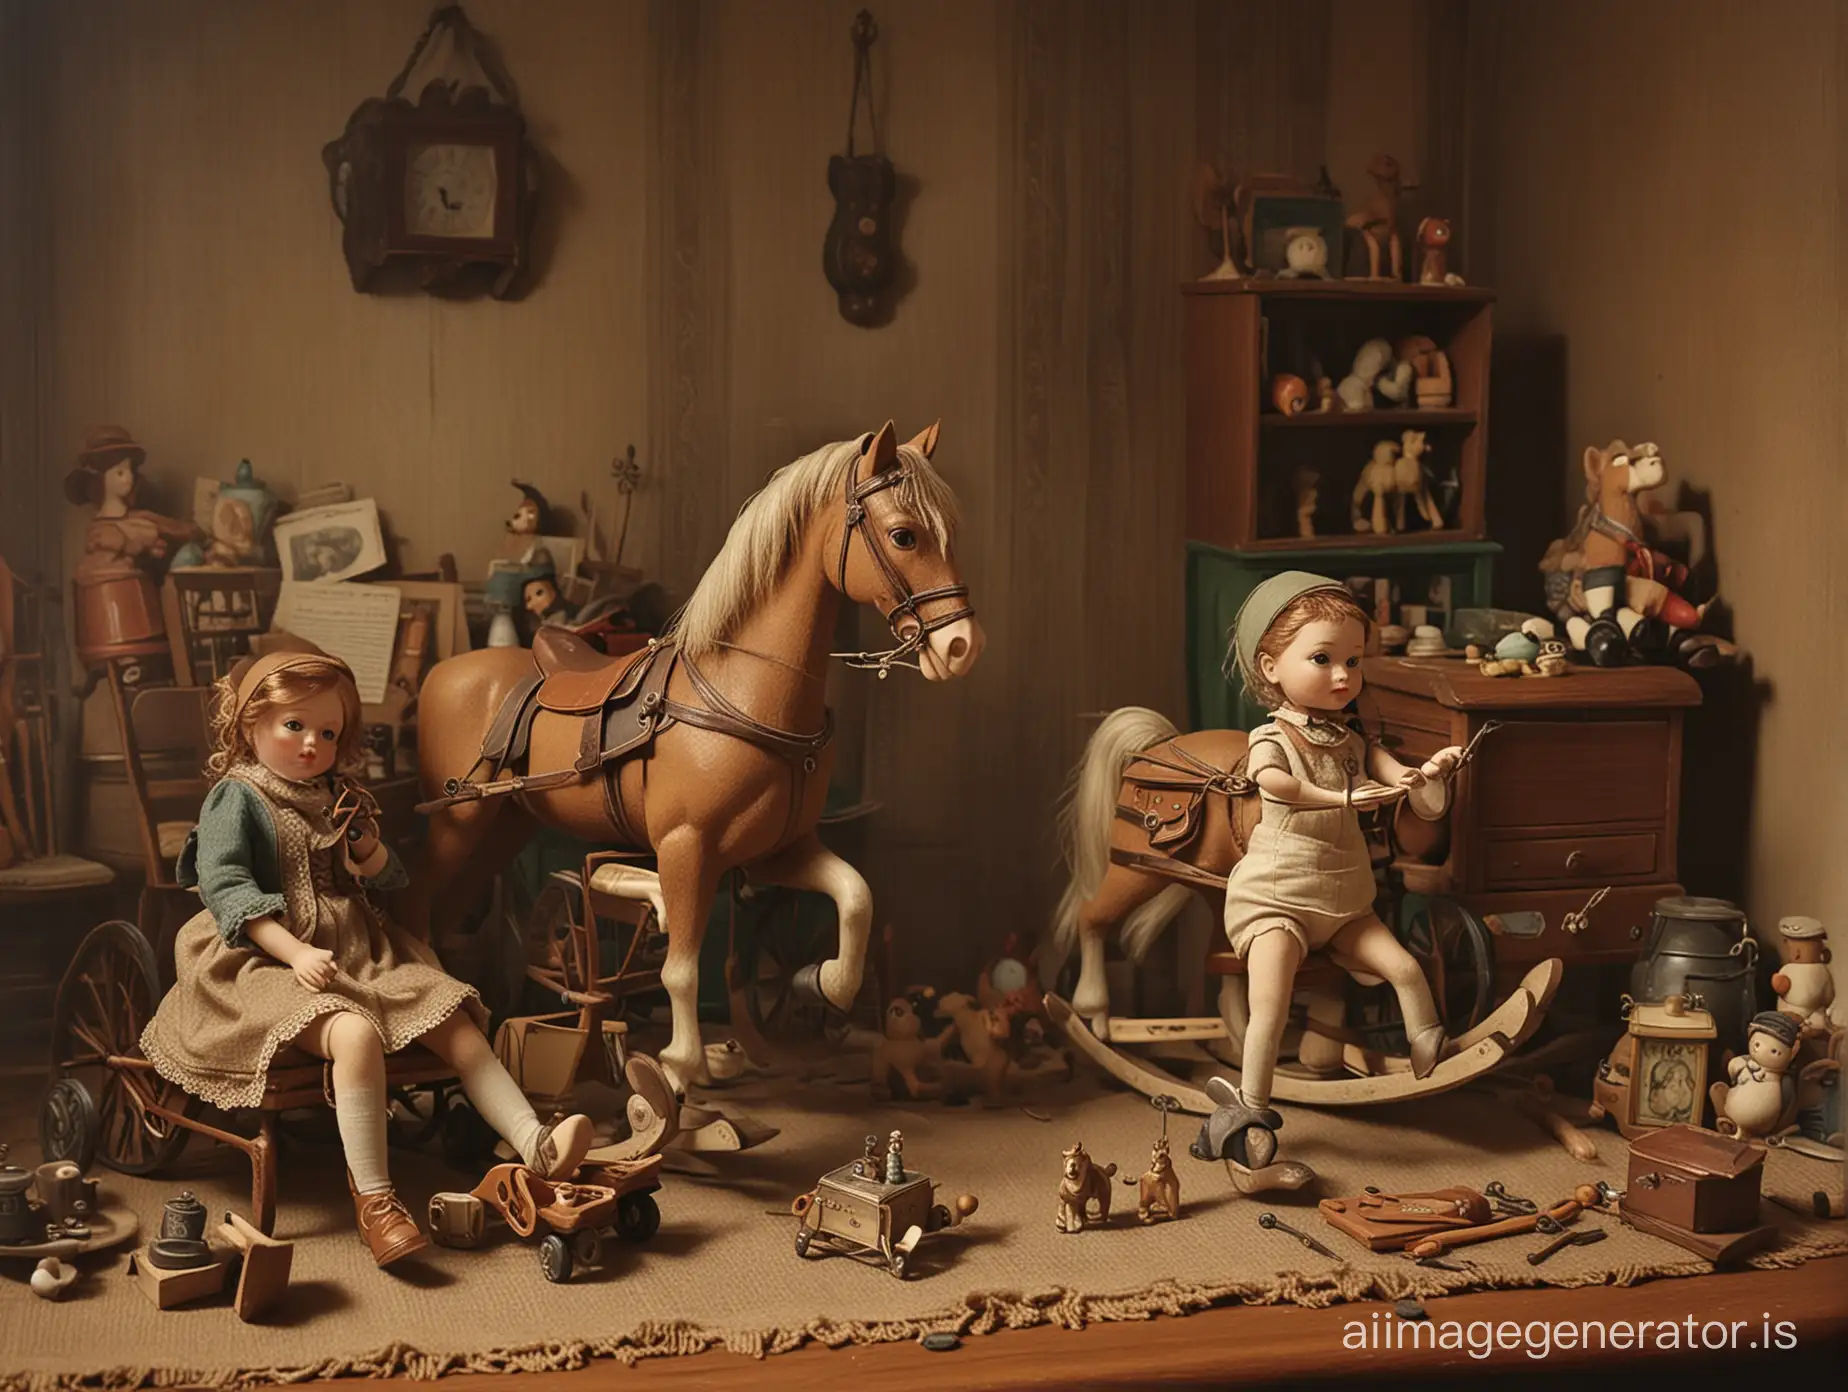 Nostalgic-Collection-of-Dusty-Toys-Vintage-Dolls-Music-Boxes-and-More